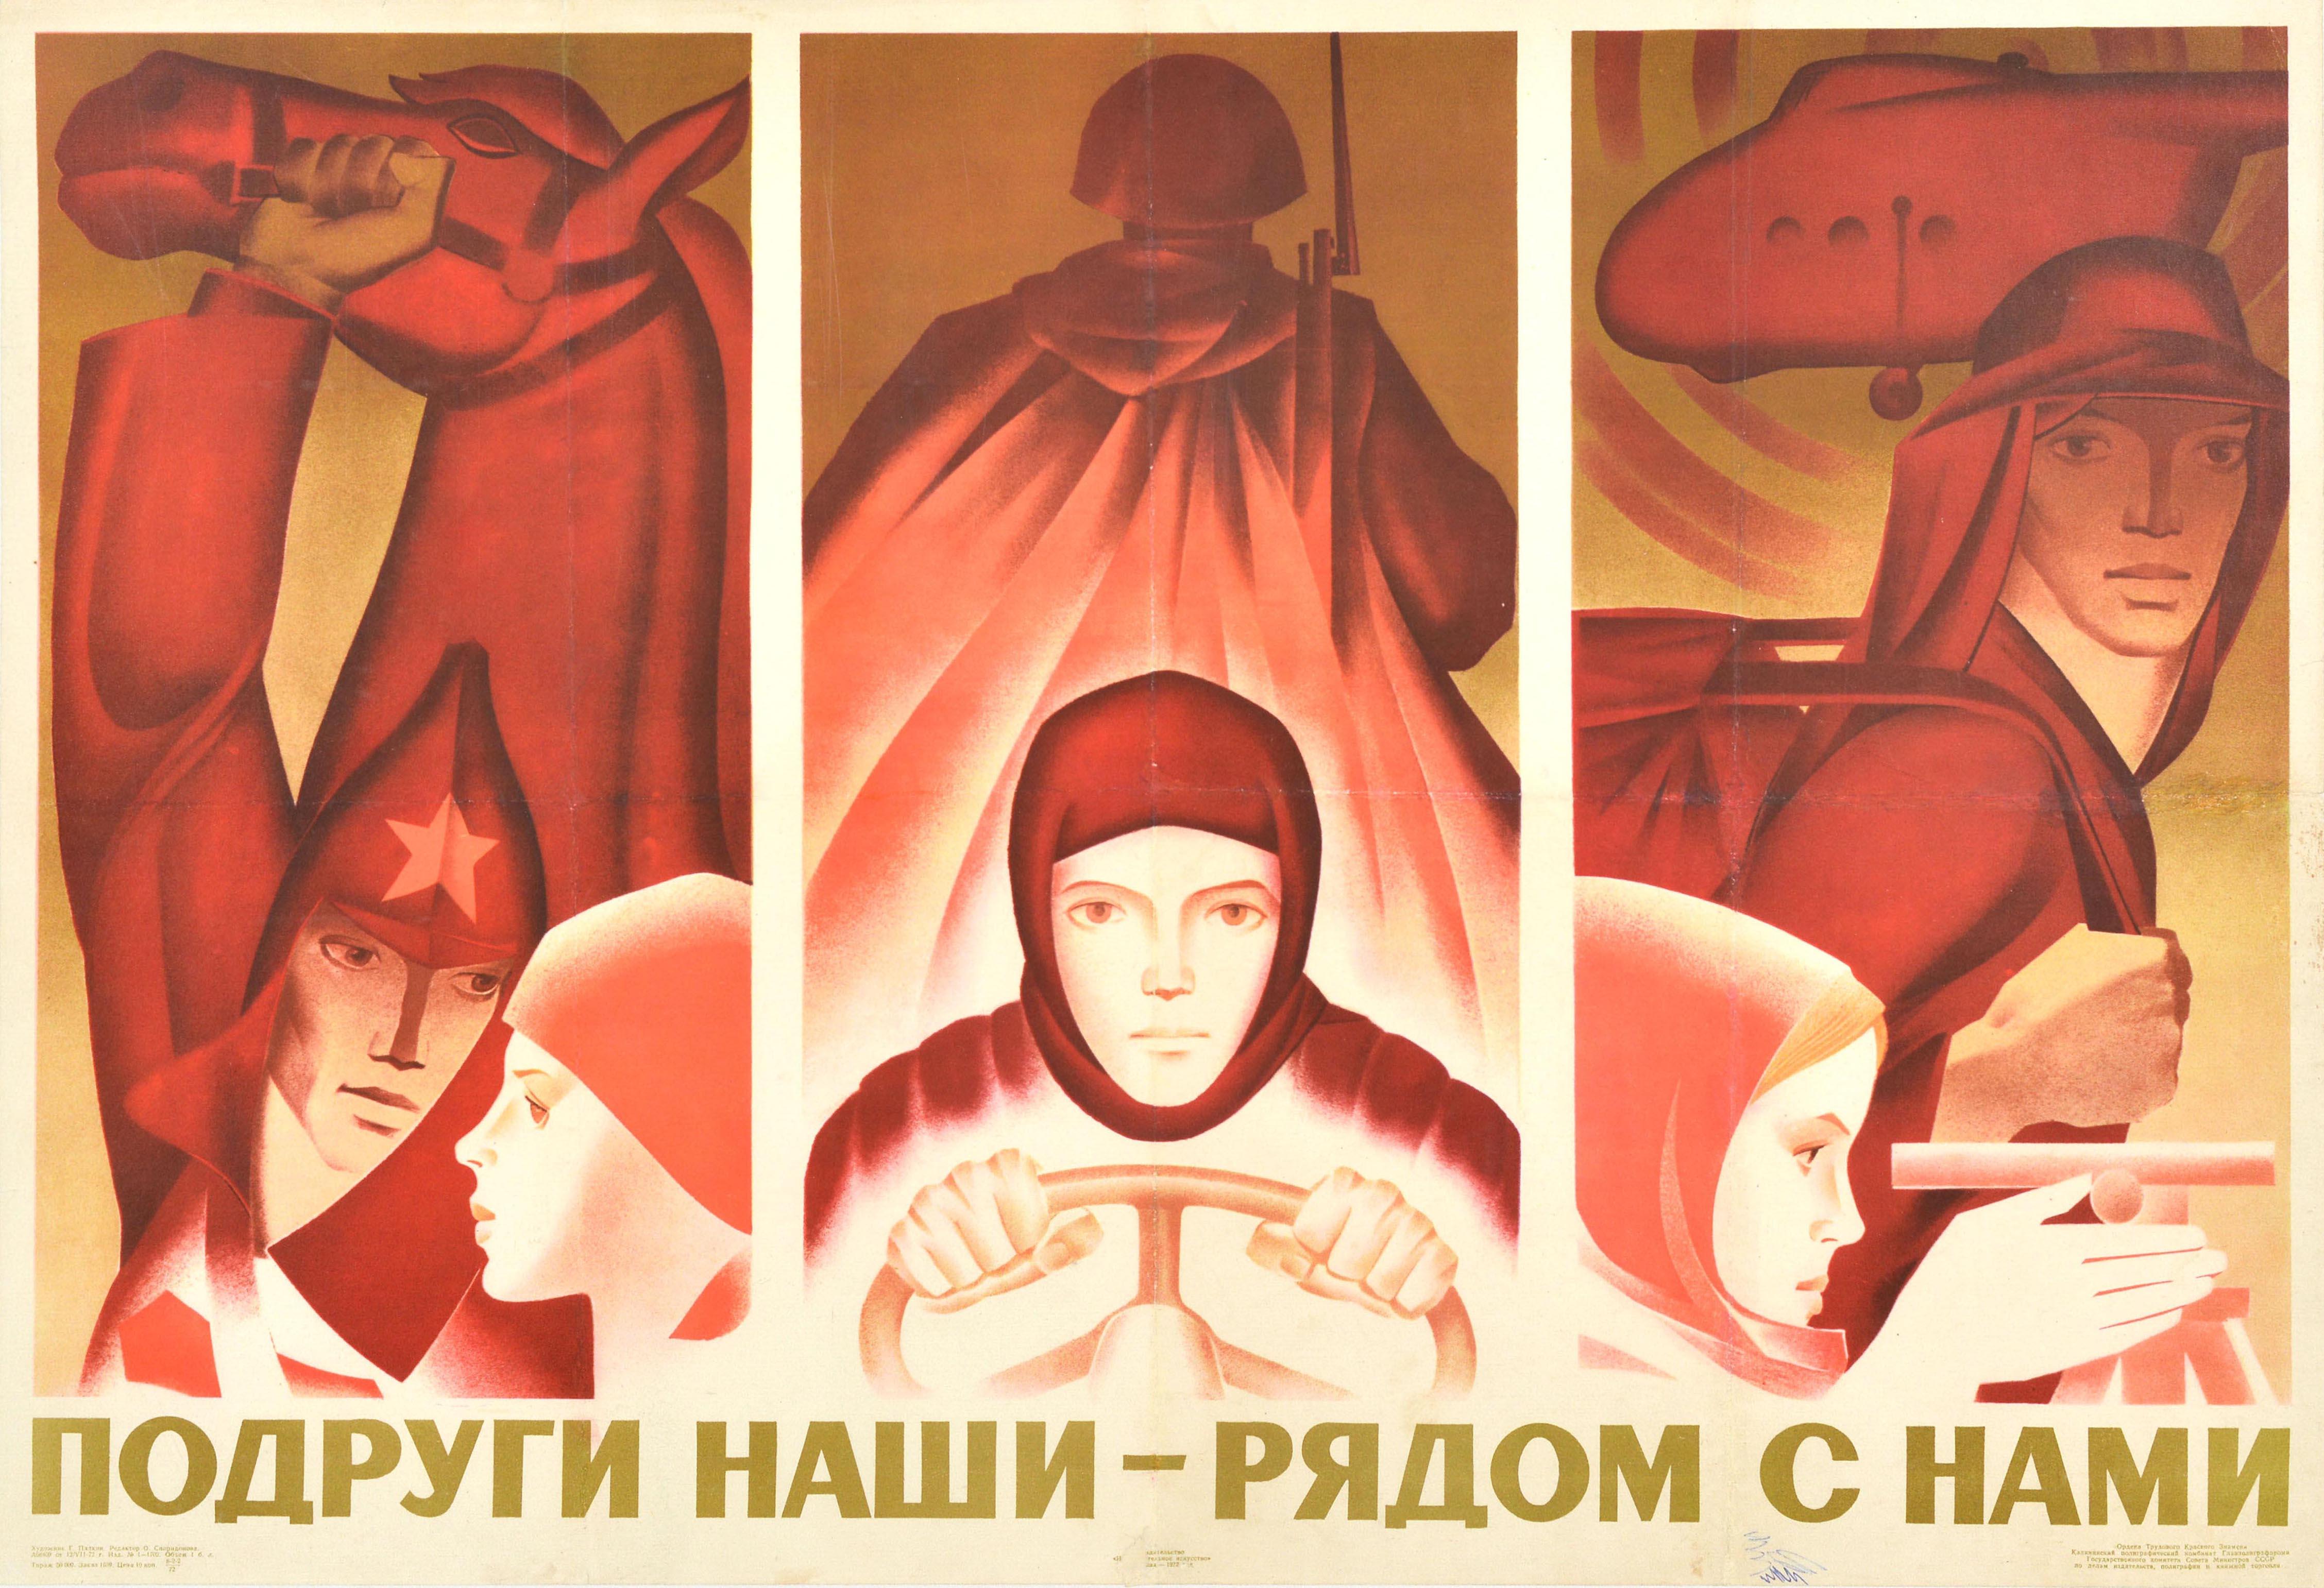 Unknown Print - Original Vintage Soviet Propaganda Poster Our Women Are With Us USSR Army Design